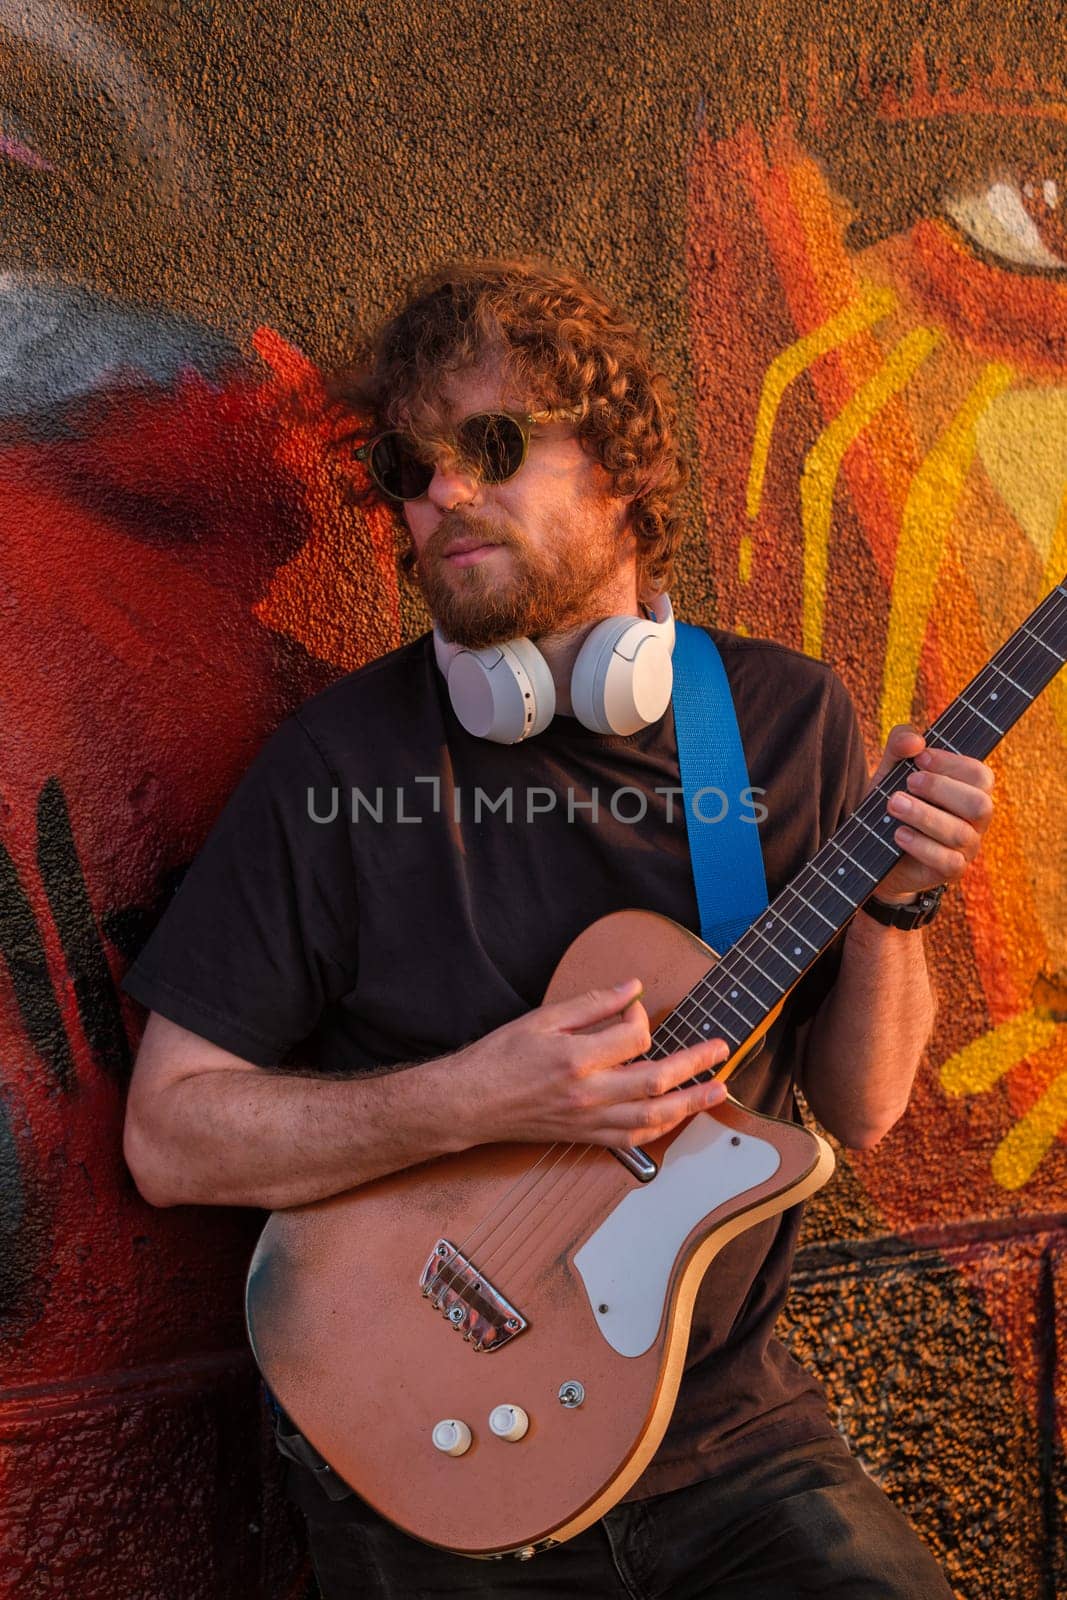 Street musician playing electric guitar in the street by dimol